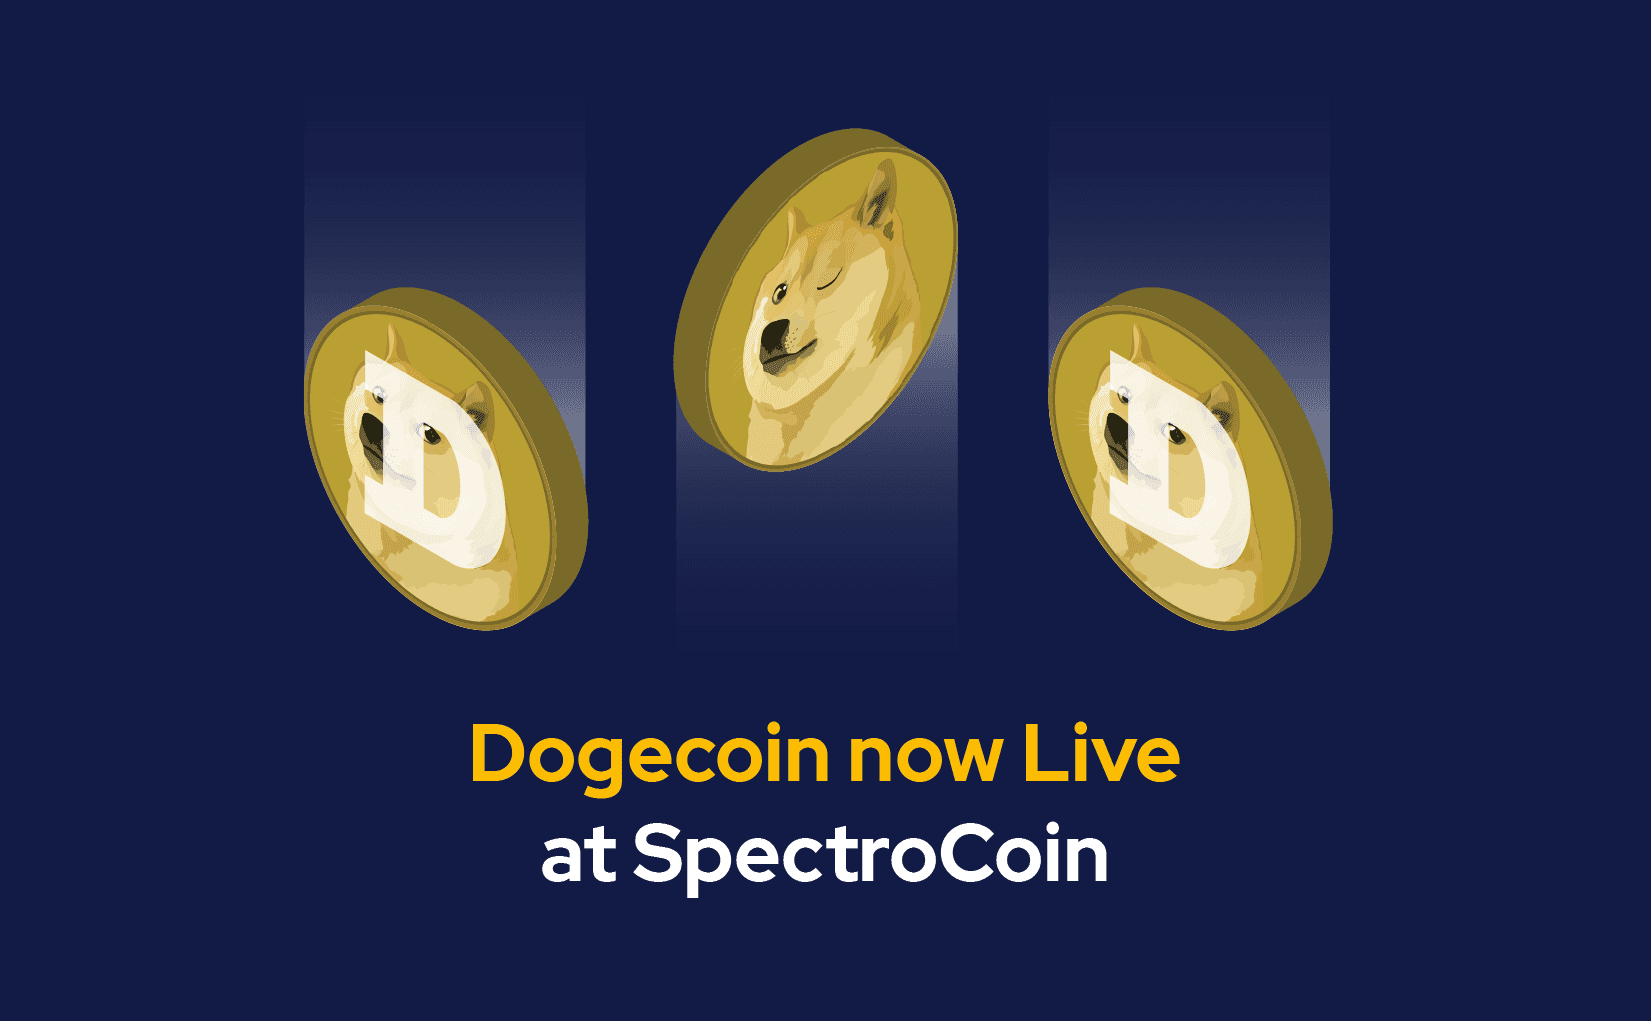 Dogecoin now live at SpectroCoin